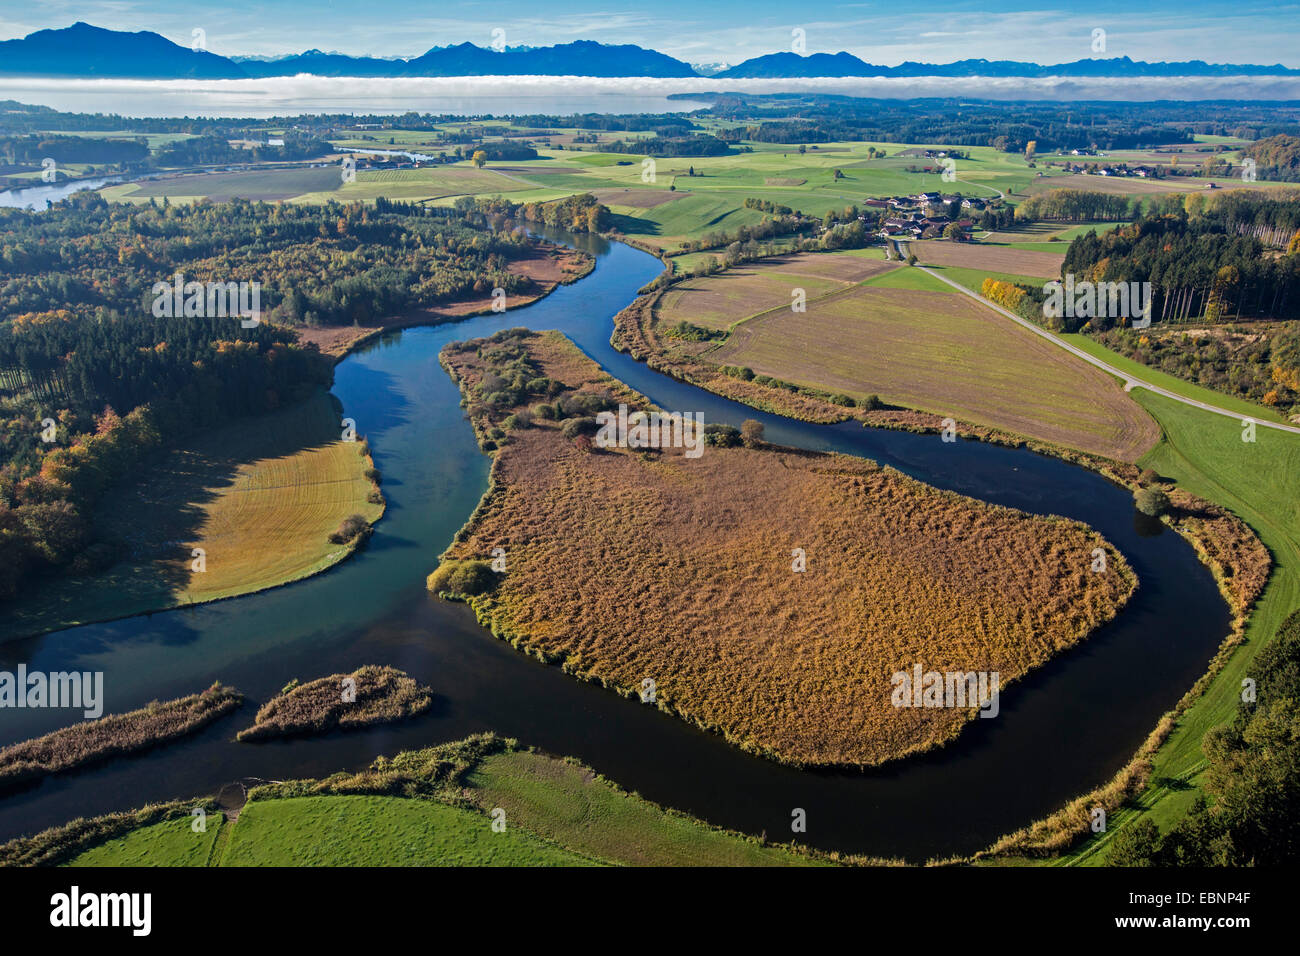 aerial view to course of river Alz near Lake Chiemsee, the Alps in background, Germany, Bavaria, Lake Chiemsee Stock Photo